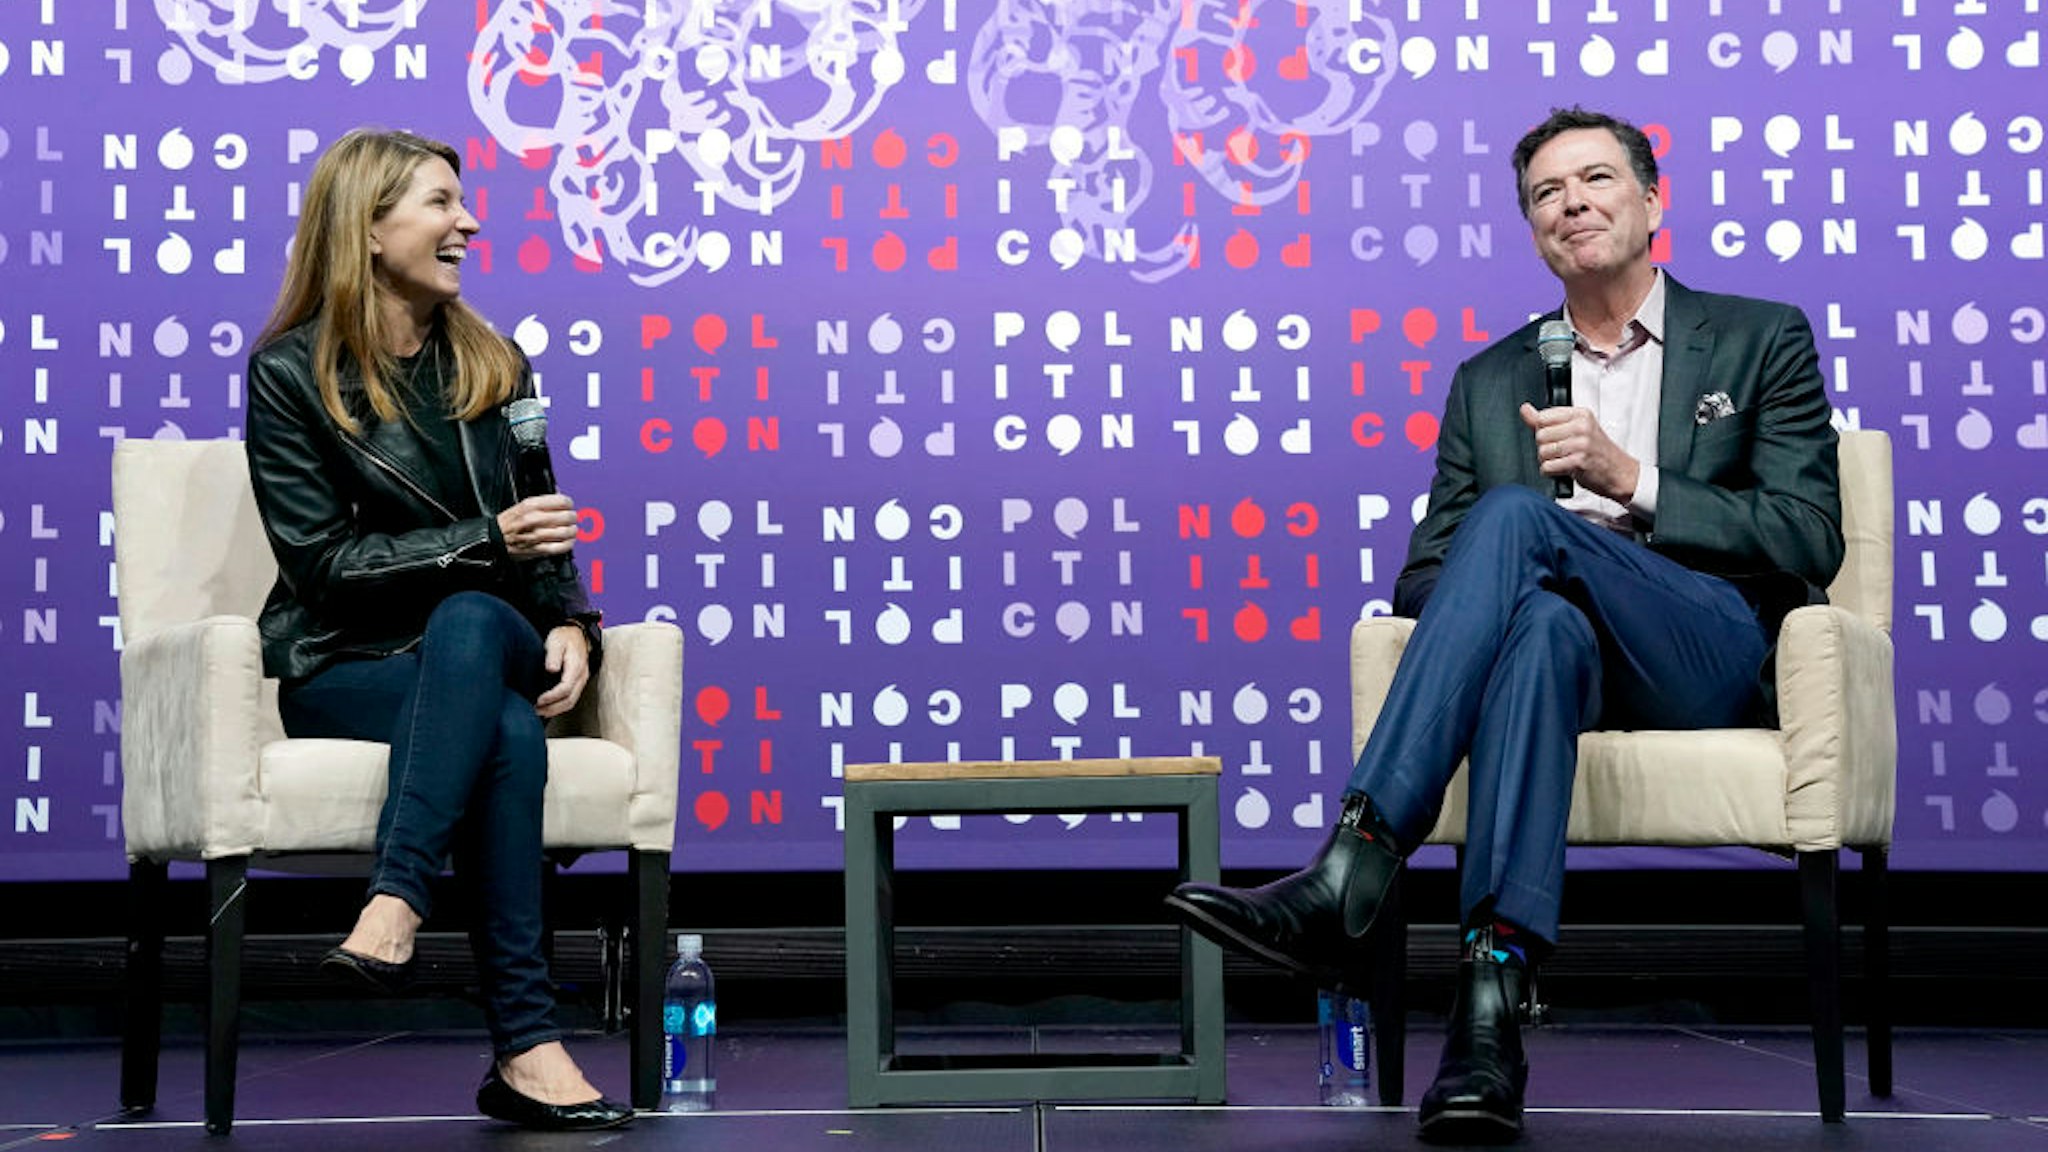 Nicolle Wallace and James Comey speak onstage during the 2019 Politicon at Music City Center on October 26, 2019 in Nashville, Tennessee.